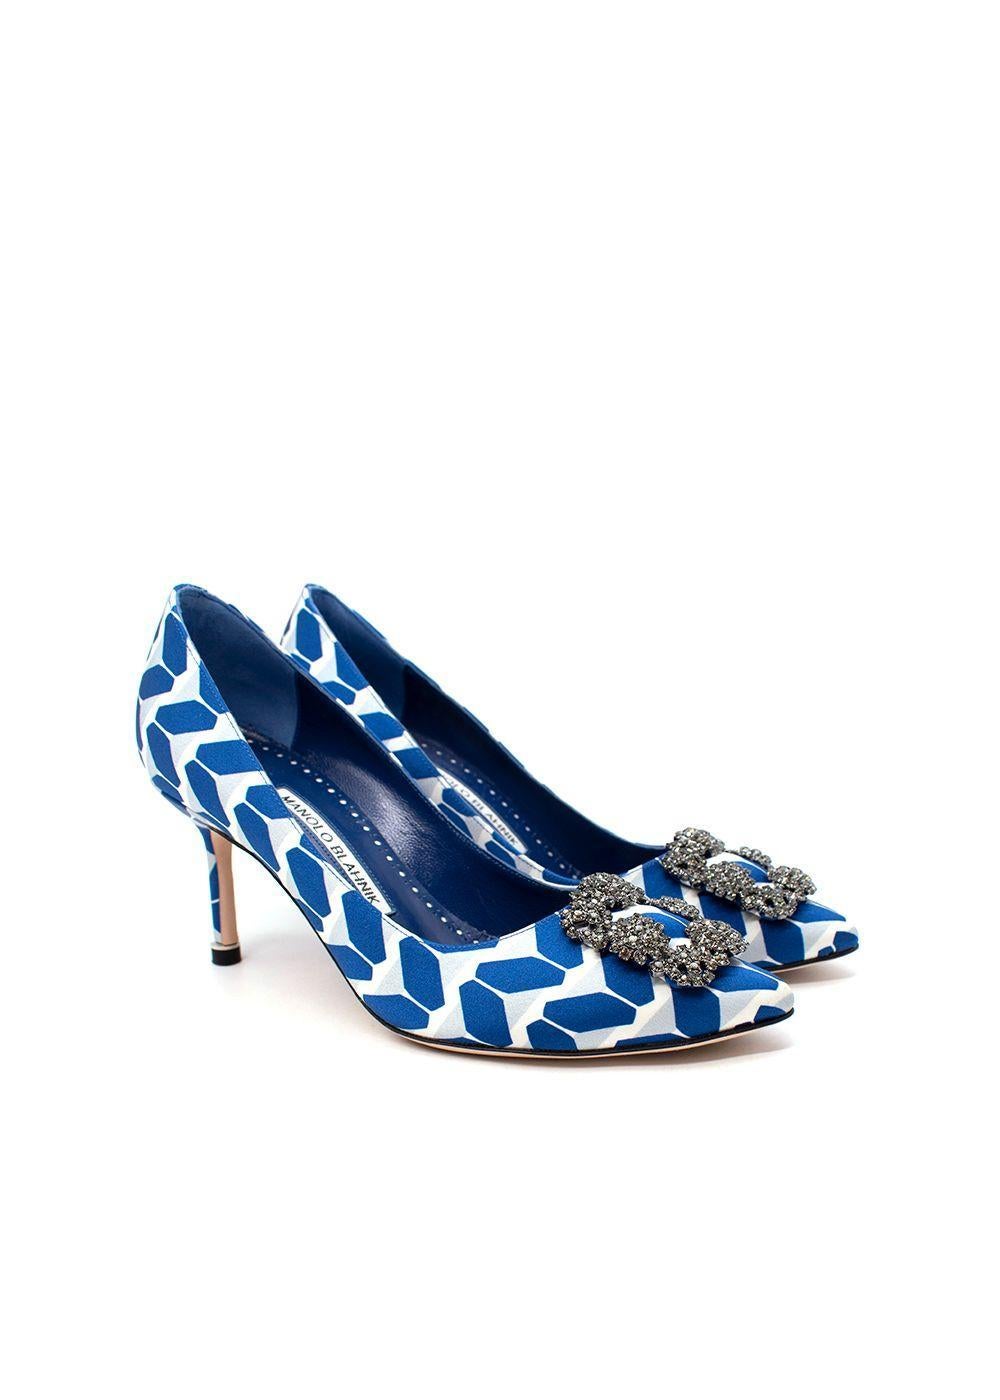 Manolo Blahnik Blue Hangisi 105 Cosmo Embellished Pumps

- Vibrant block pattern print on silk satin
- Swarovski crystal-embellished buckle
- Covered stiletto heel
- Blue leather lined
- Contrasting nude leather sole
- Limited edition